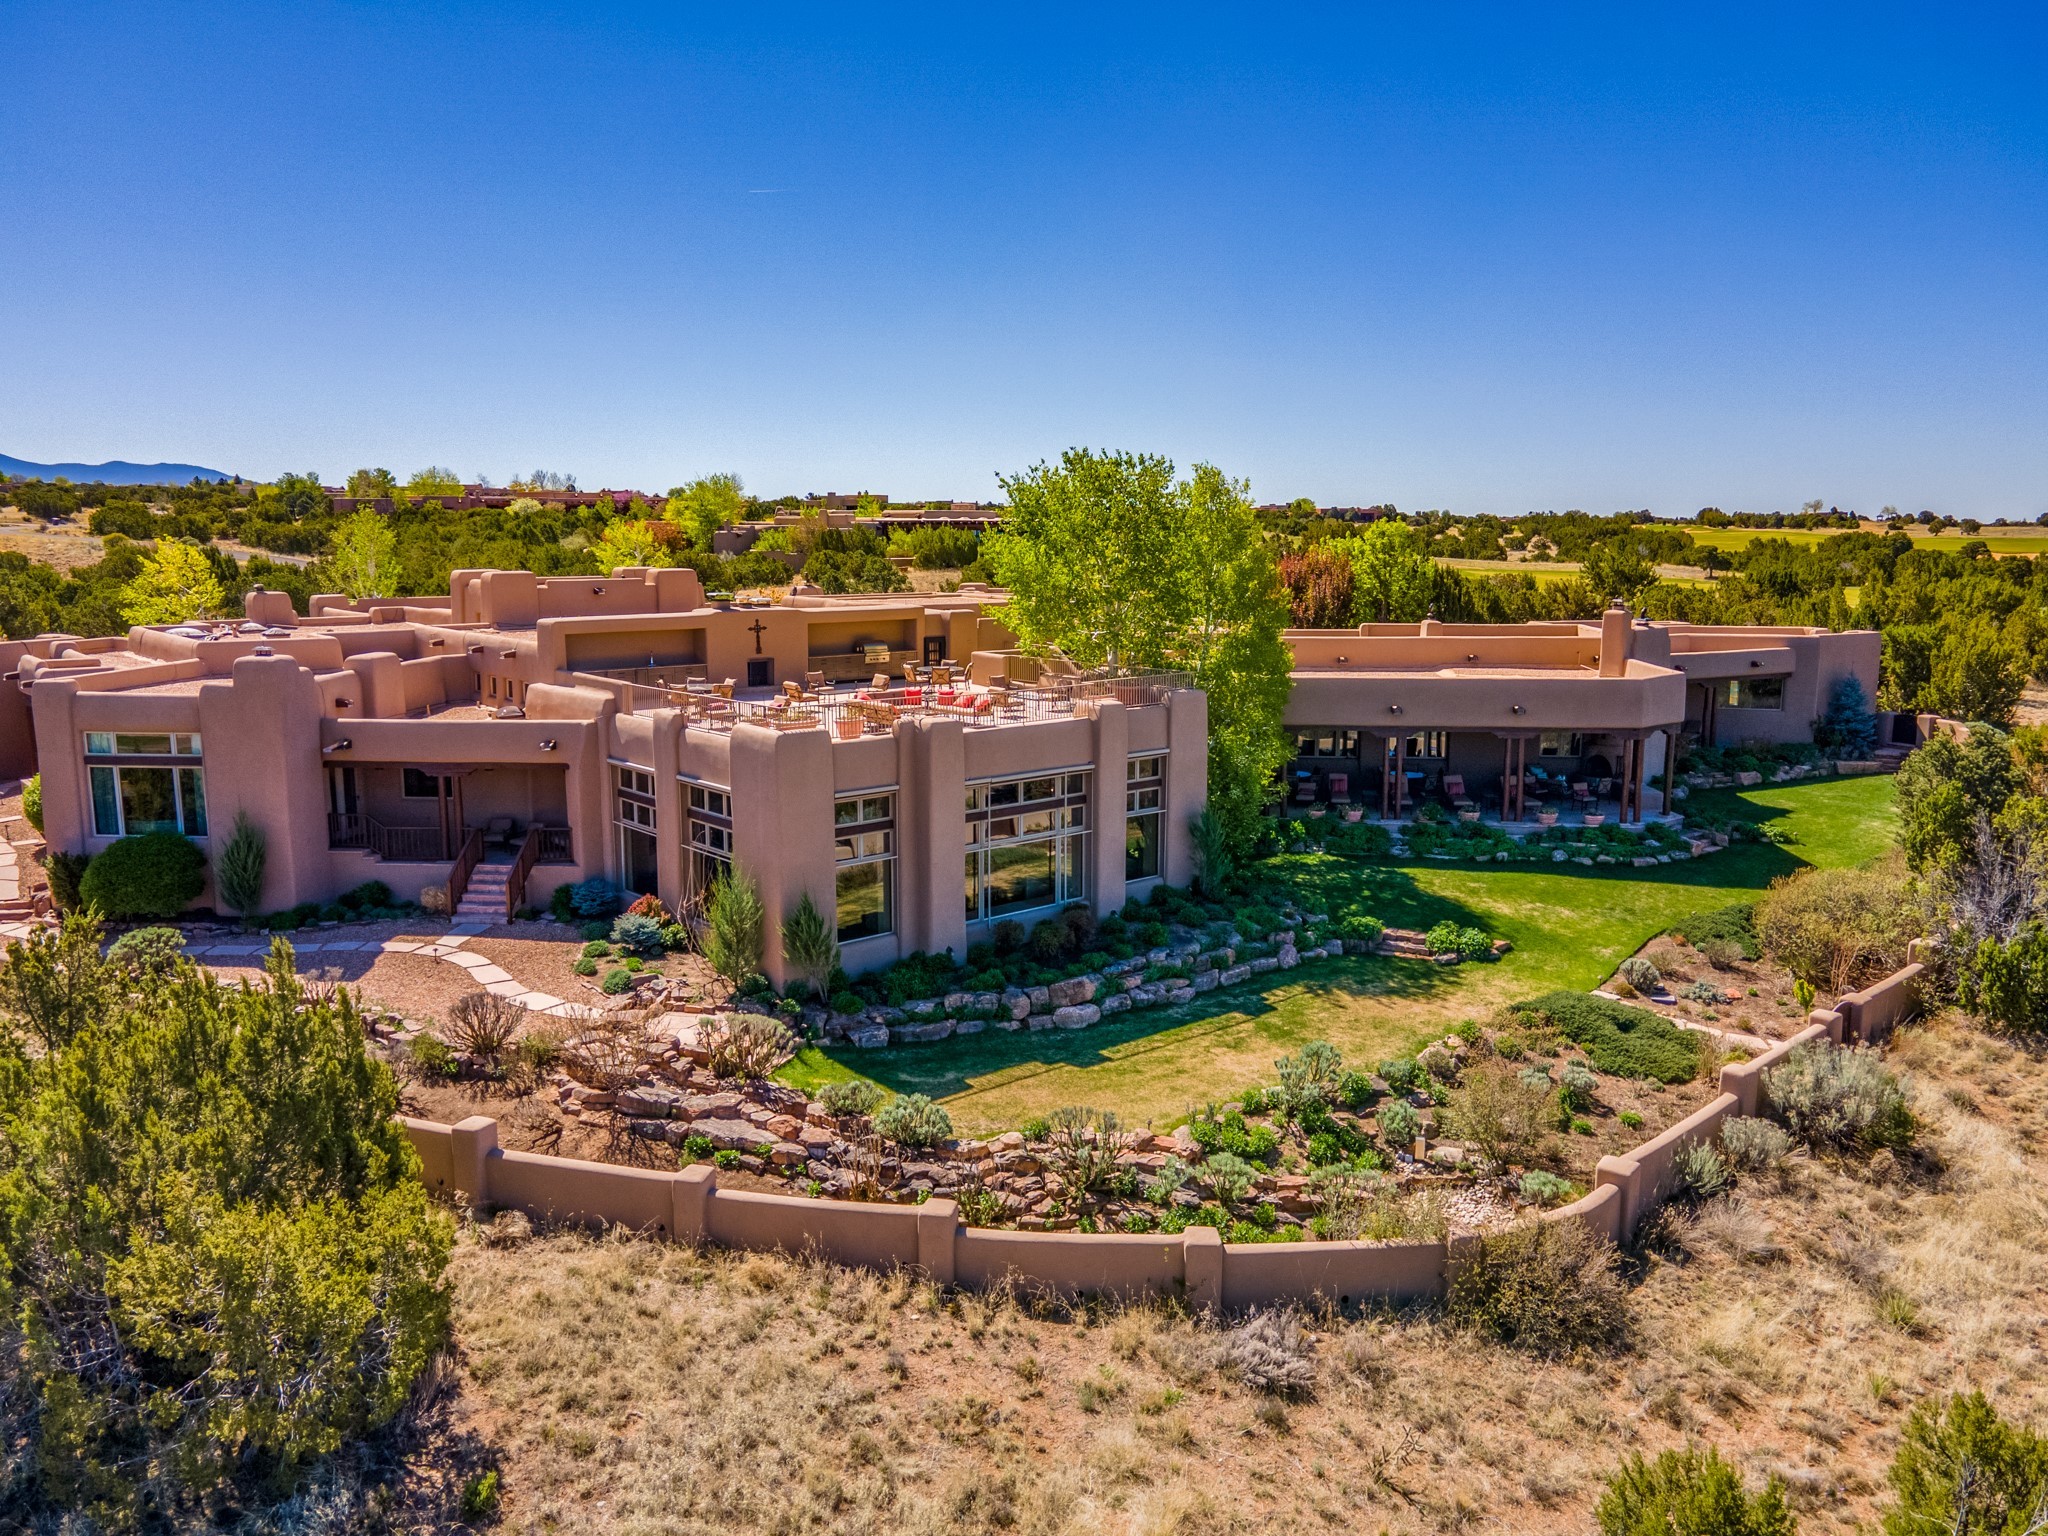 26 Stonegate Circle, Santa Fe, New Mexico 87506, 7 Bedrooms Bedrooms, ,8 BathroomsBathrooms,Residential,For Sale,26 Stonegate Circle,202336564